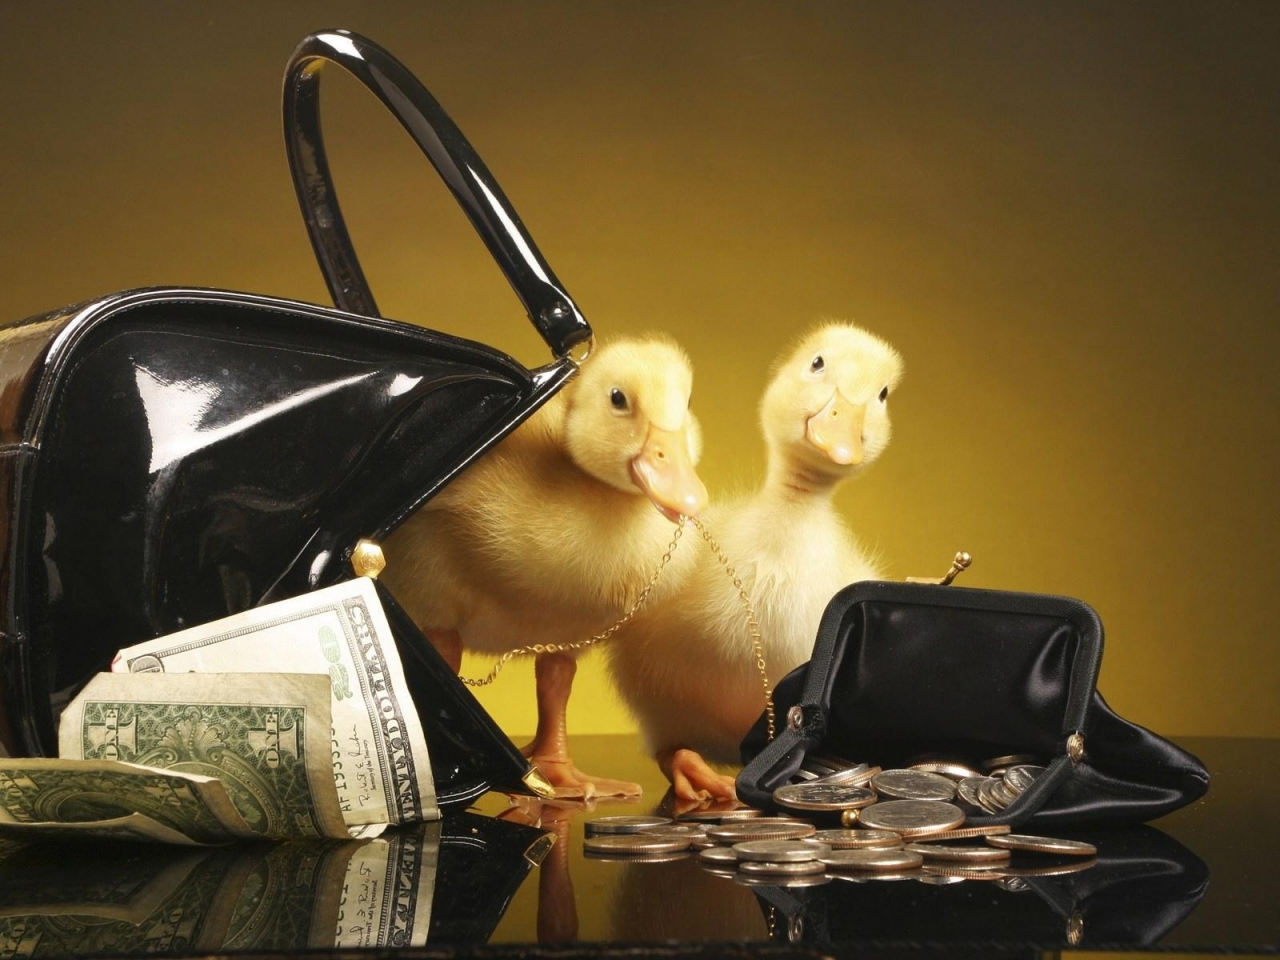 Ducklings with purse and money for 1280 x 960 resolution